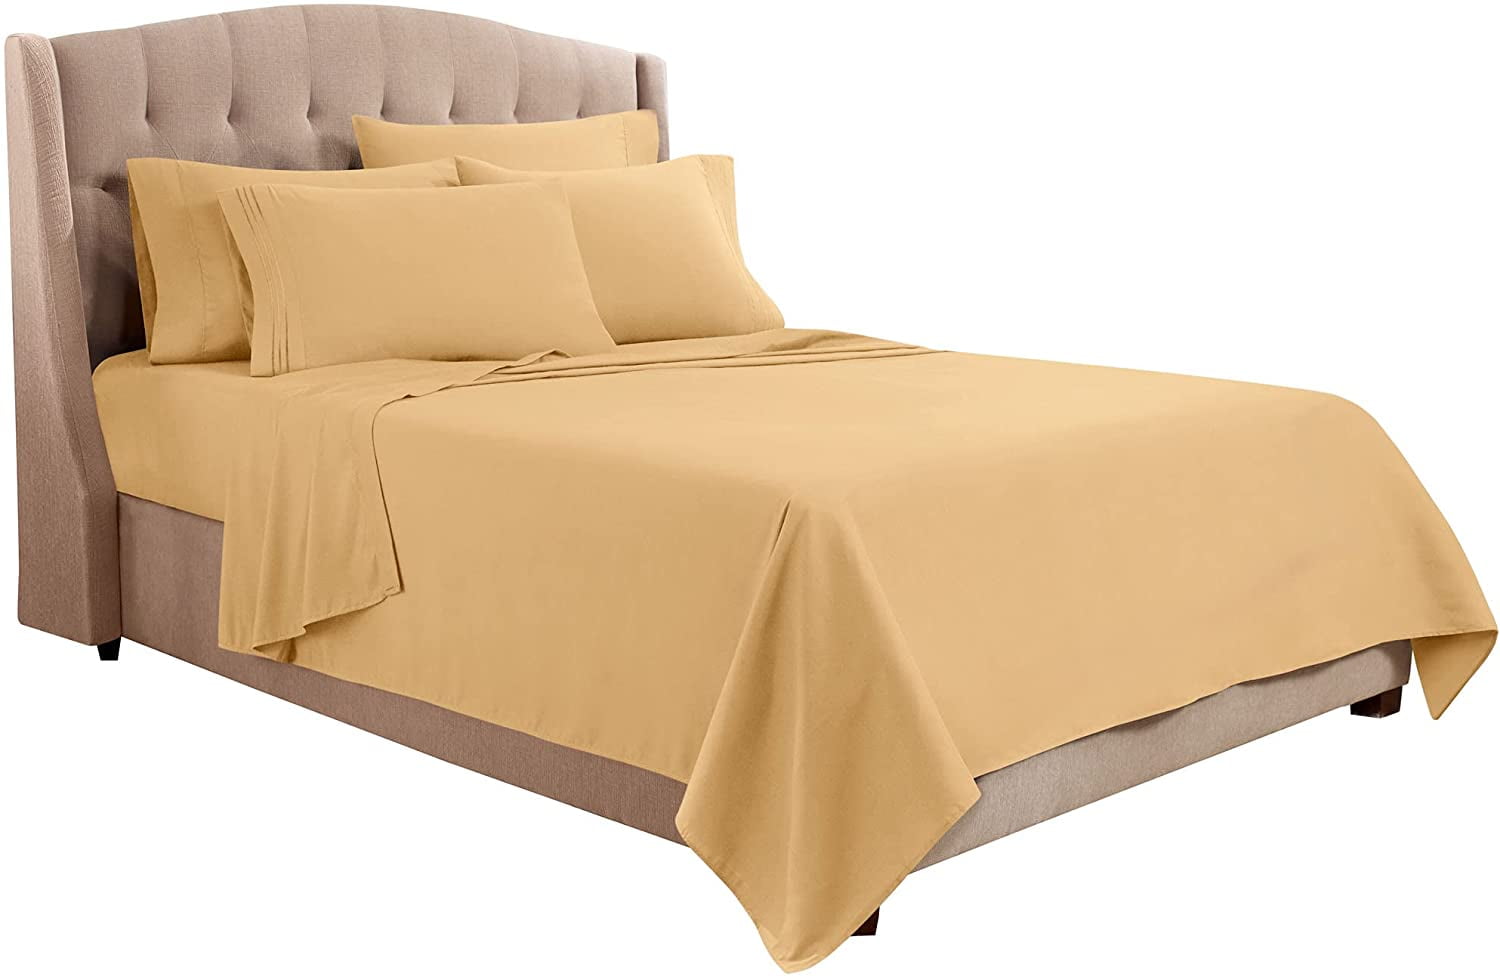 1000 Thread Count Egyptian Cotton Deep Pocket Bedding Items Solid Colors Twin XL 